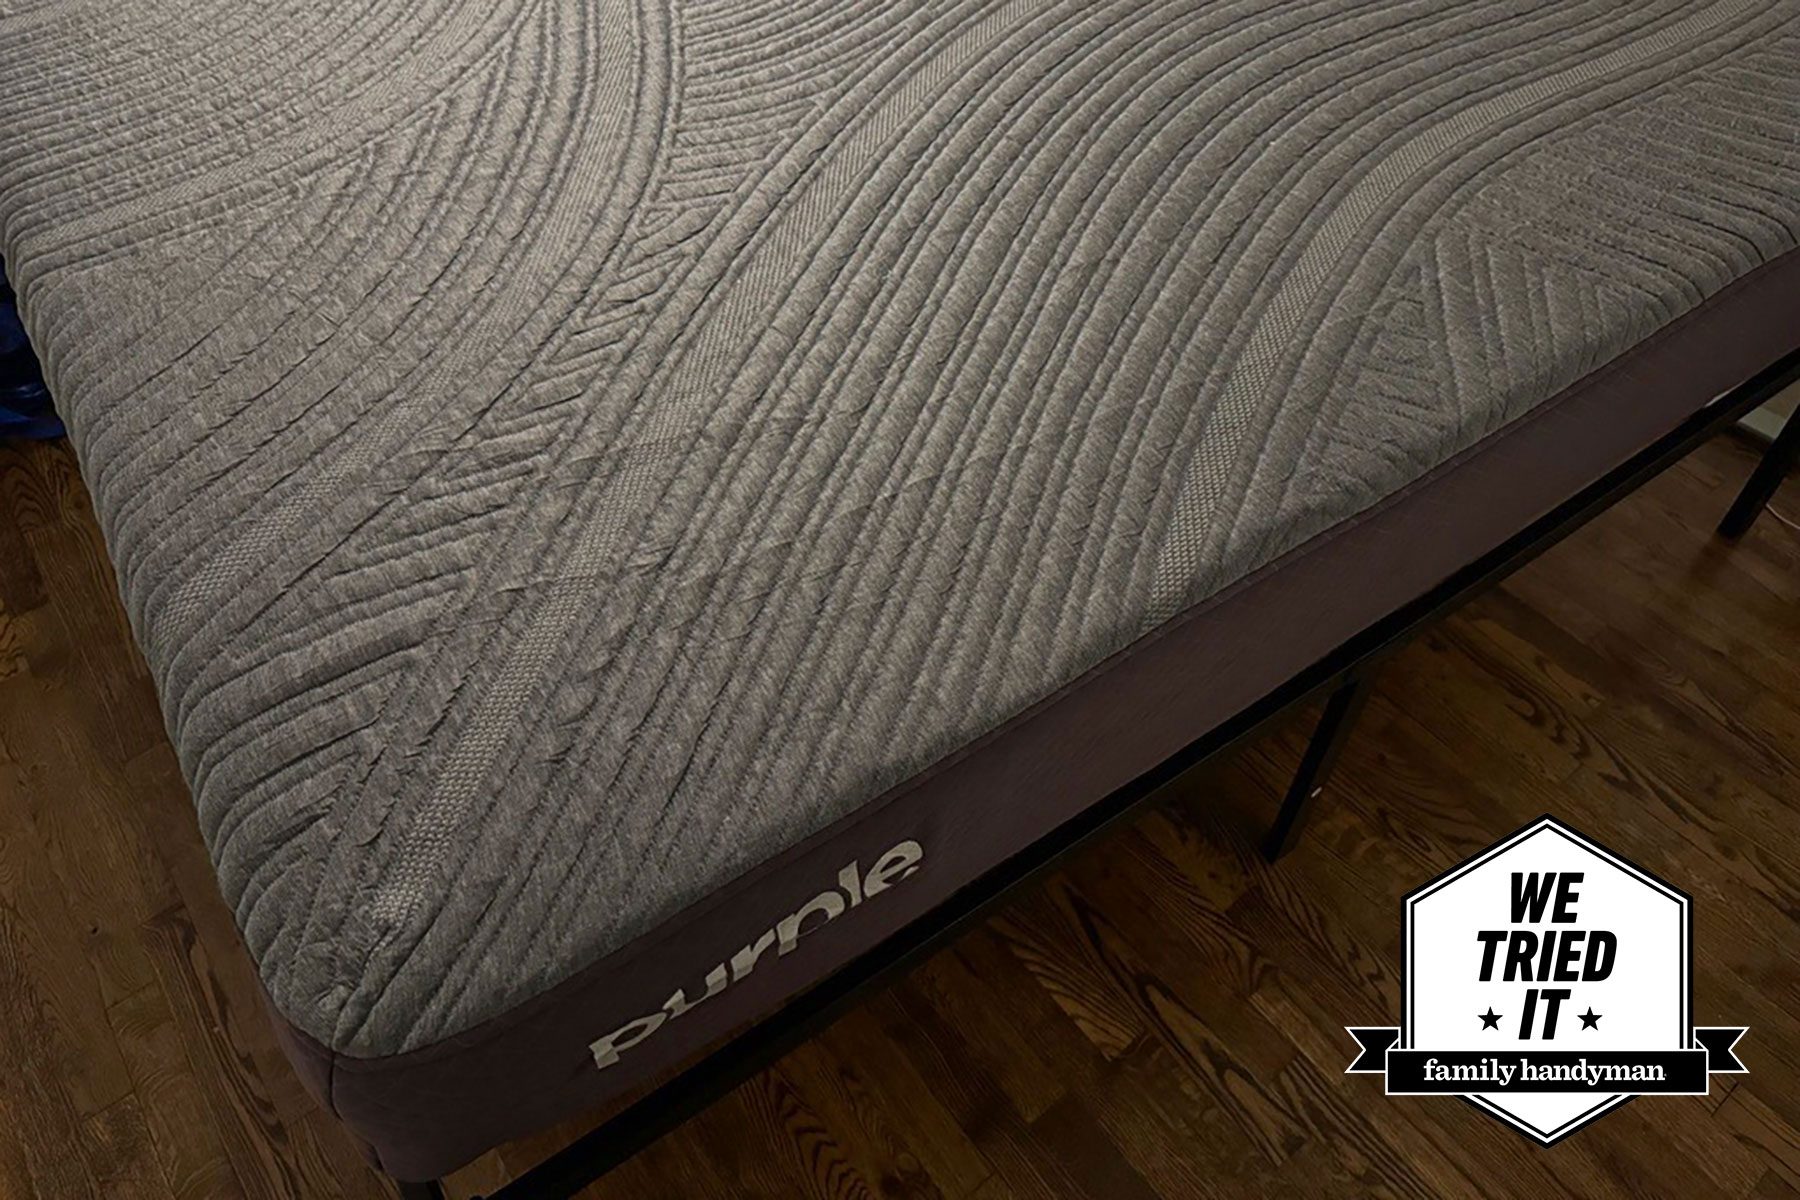 Purple and Mattress Firm Released a New Hybrid Cooling Mattress, and We Tried It